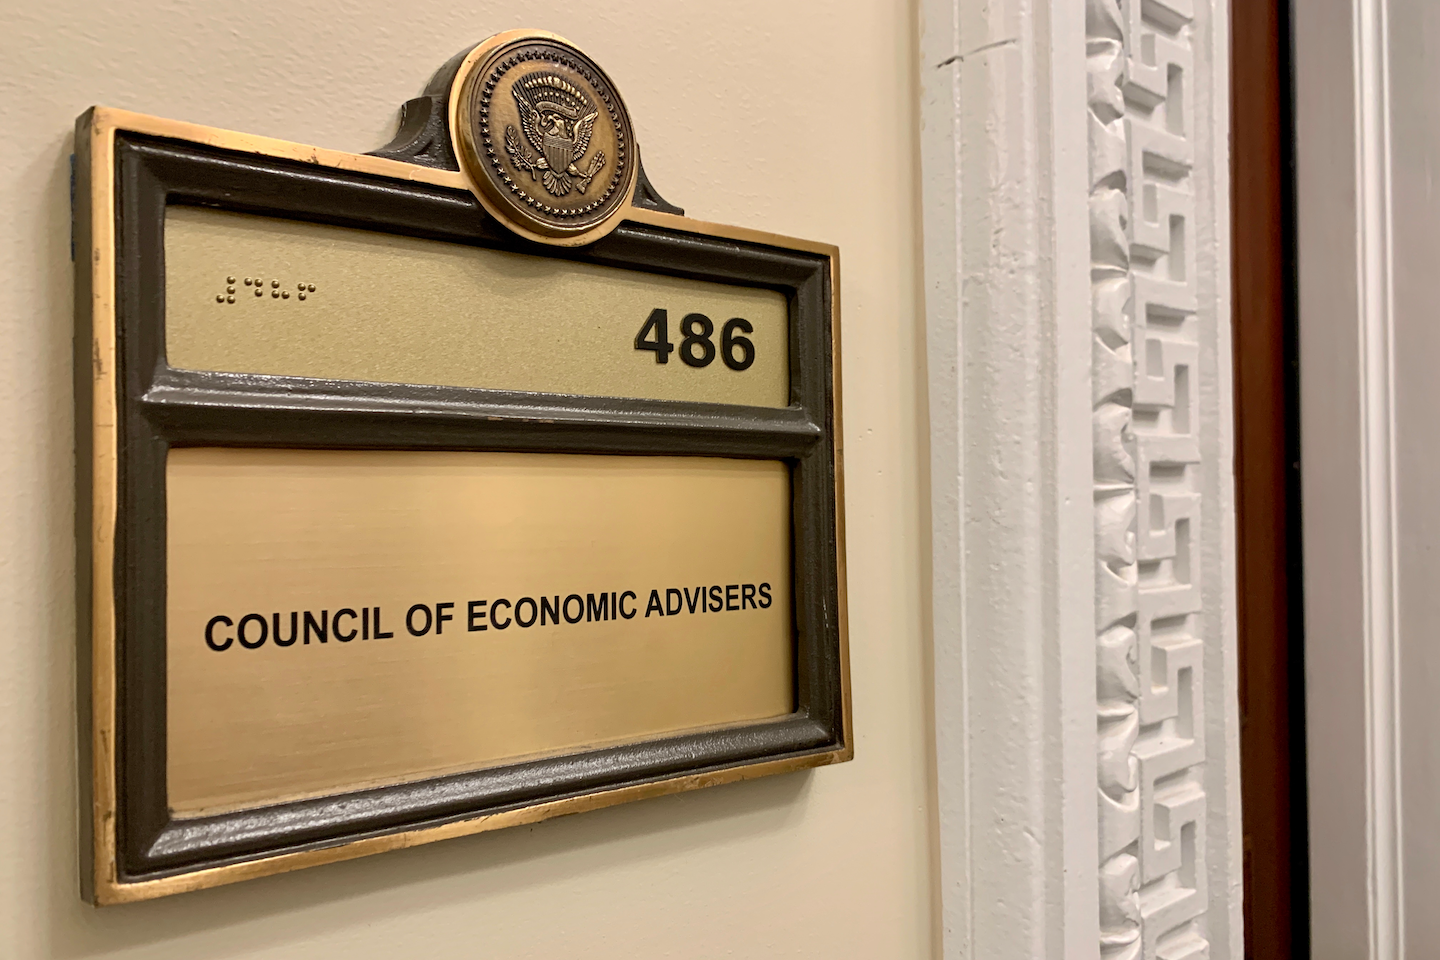 The Council of Economic Advisers and the Role of Expert Economic Advice